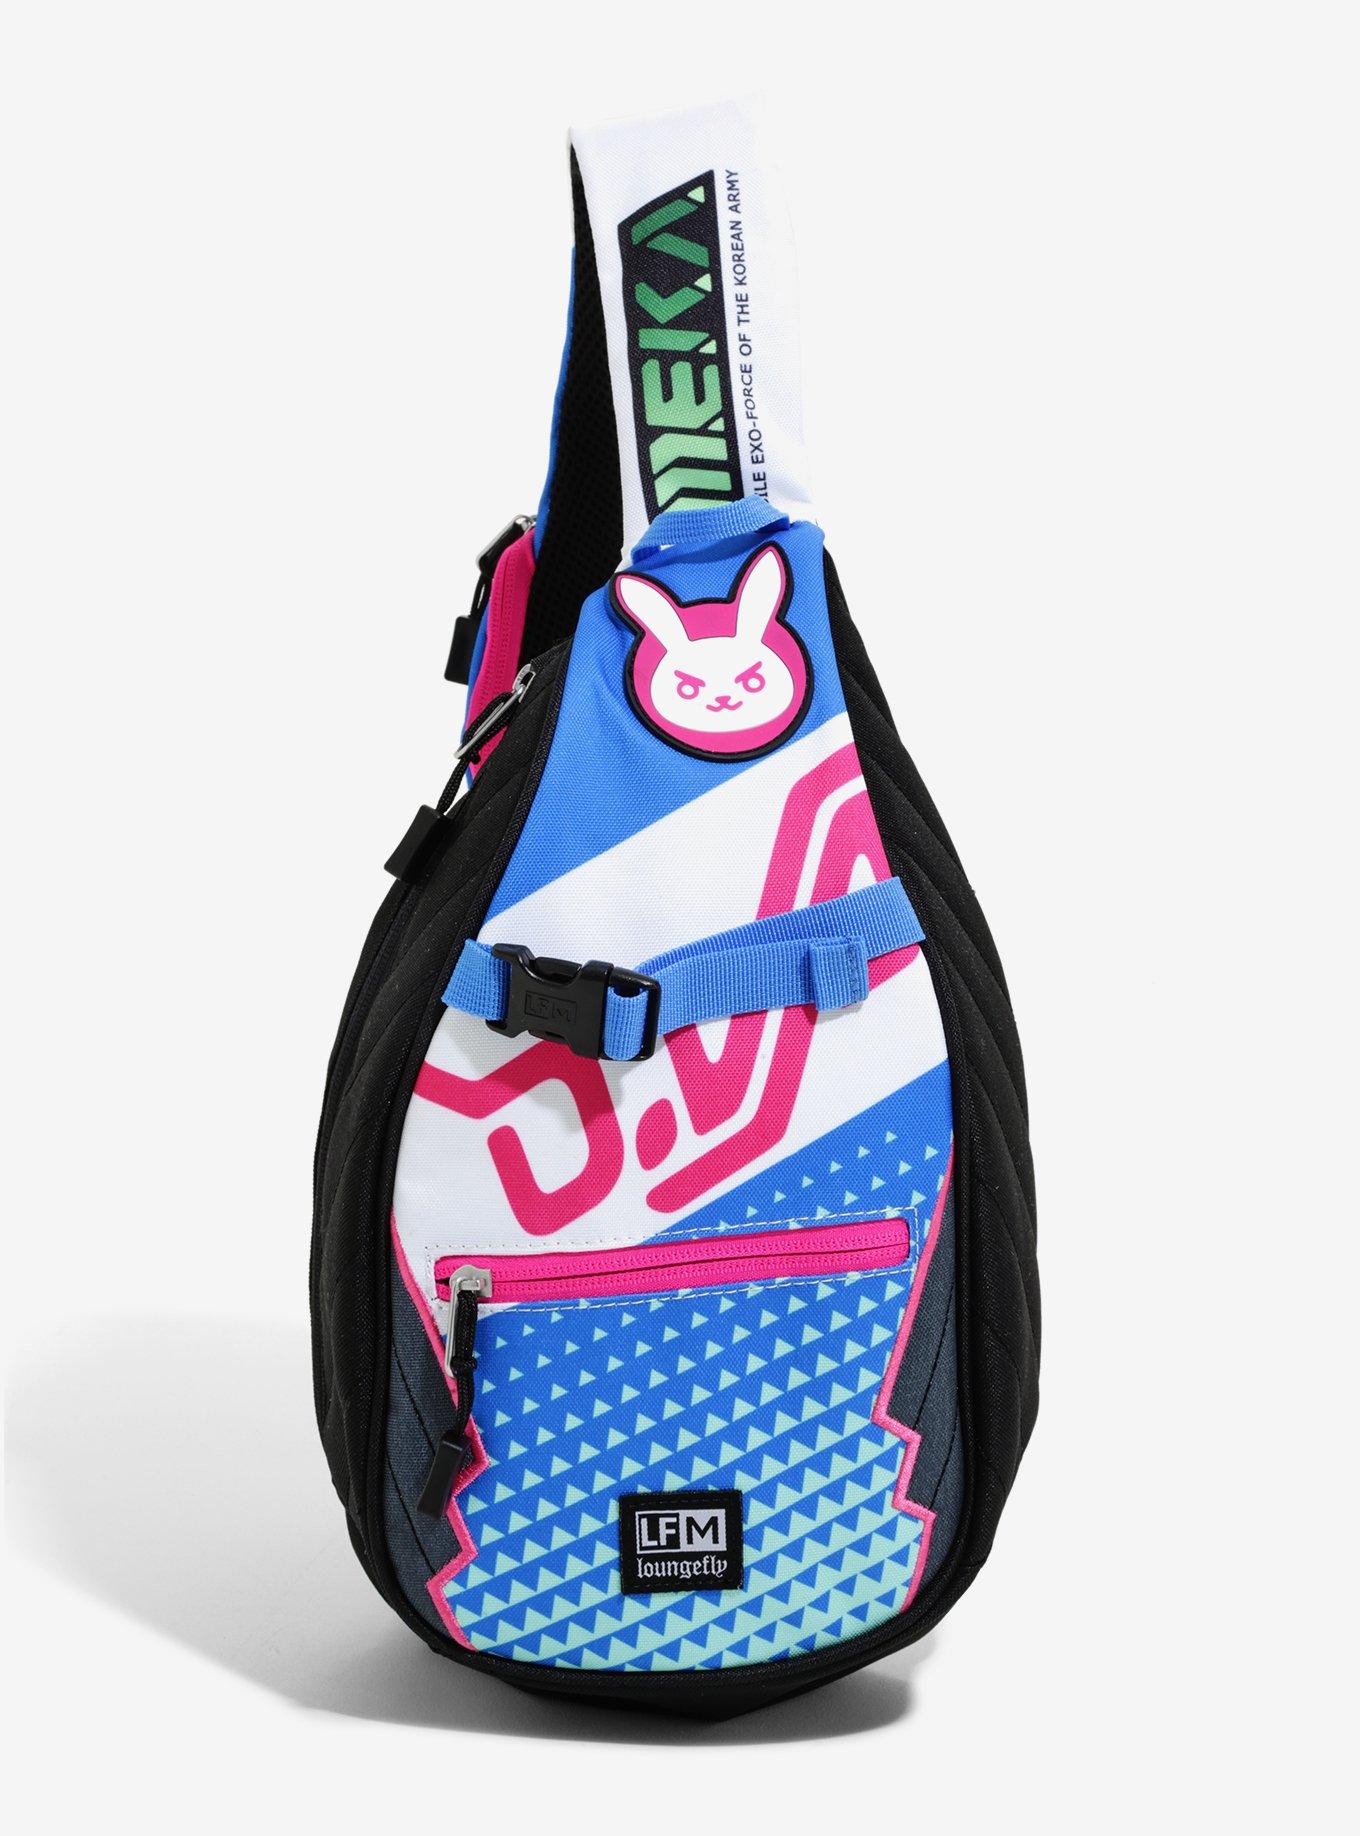 Loungefly D.Va Overwatch pink mini backpack - RARE BoxLunch exclusive